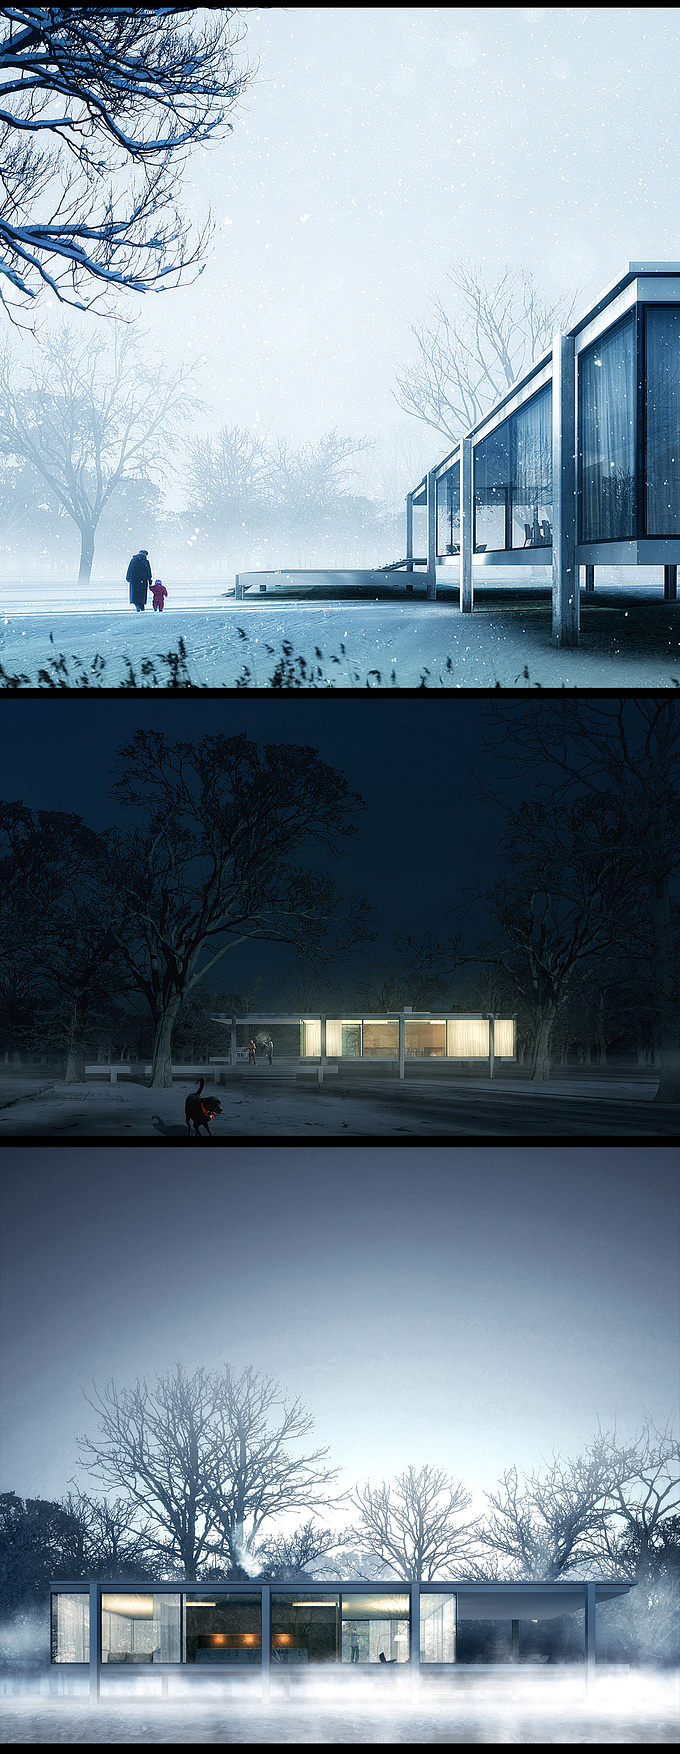 freelance - personal - 
 freelance - personal
 
 mies van der rohe :)
 cinema 4D + photoshop

 

A little exercise for Farnsworth house with a winter and coldy mood.
model from google warehouse.
rendered in c4d and lots of photoshop.